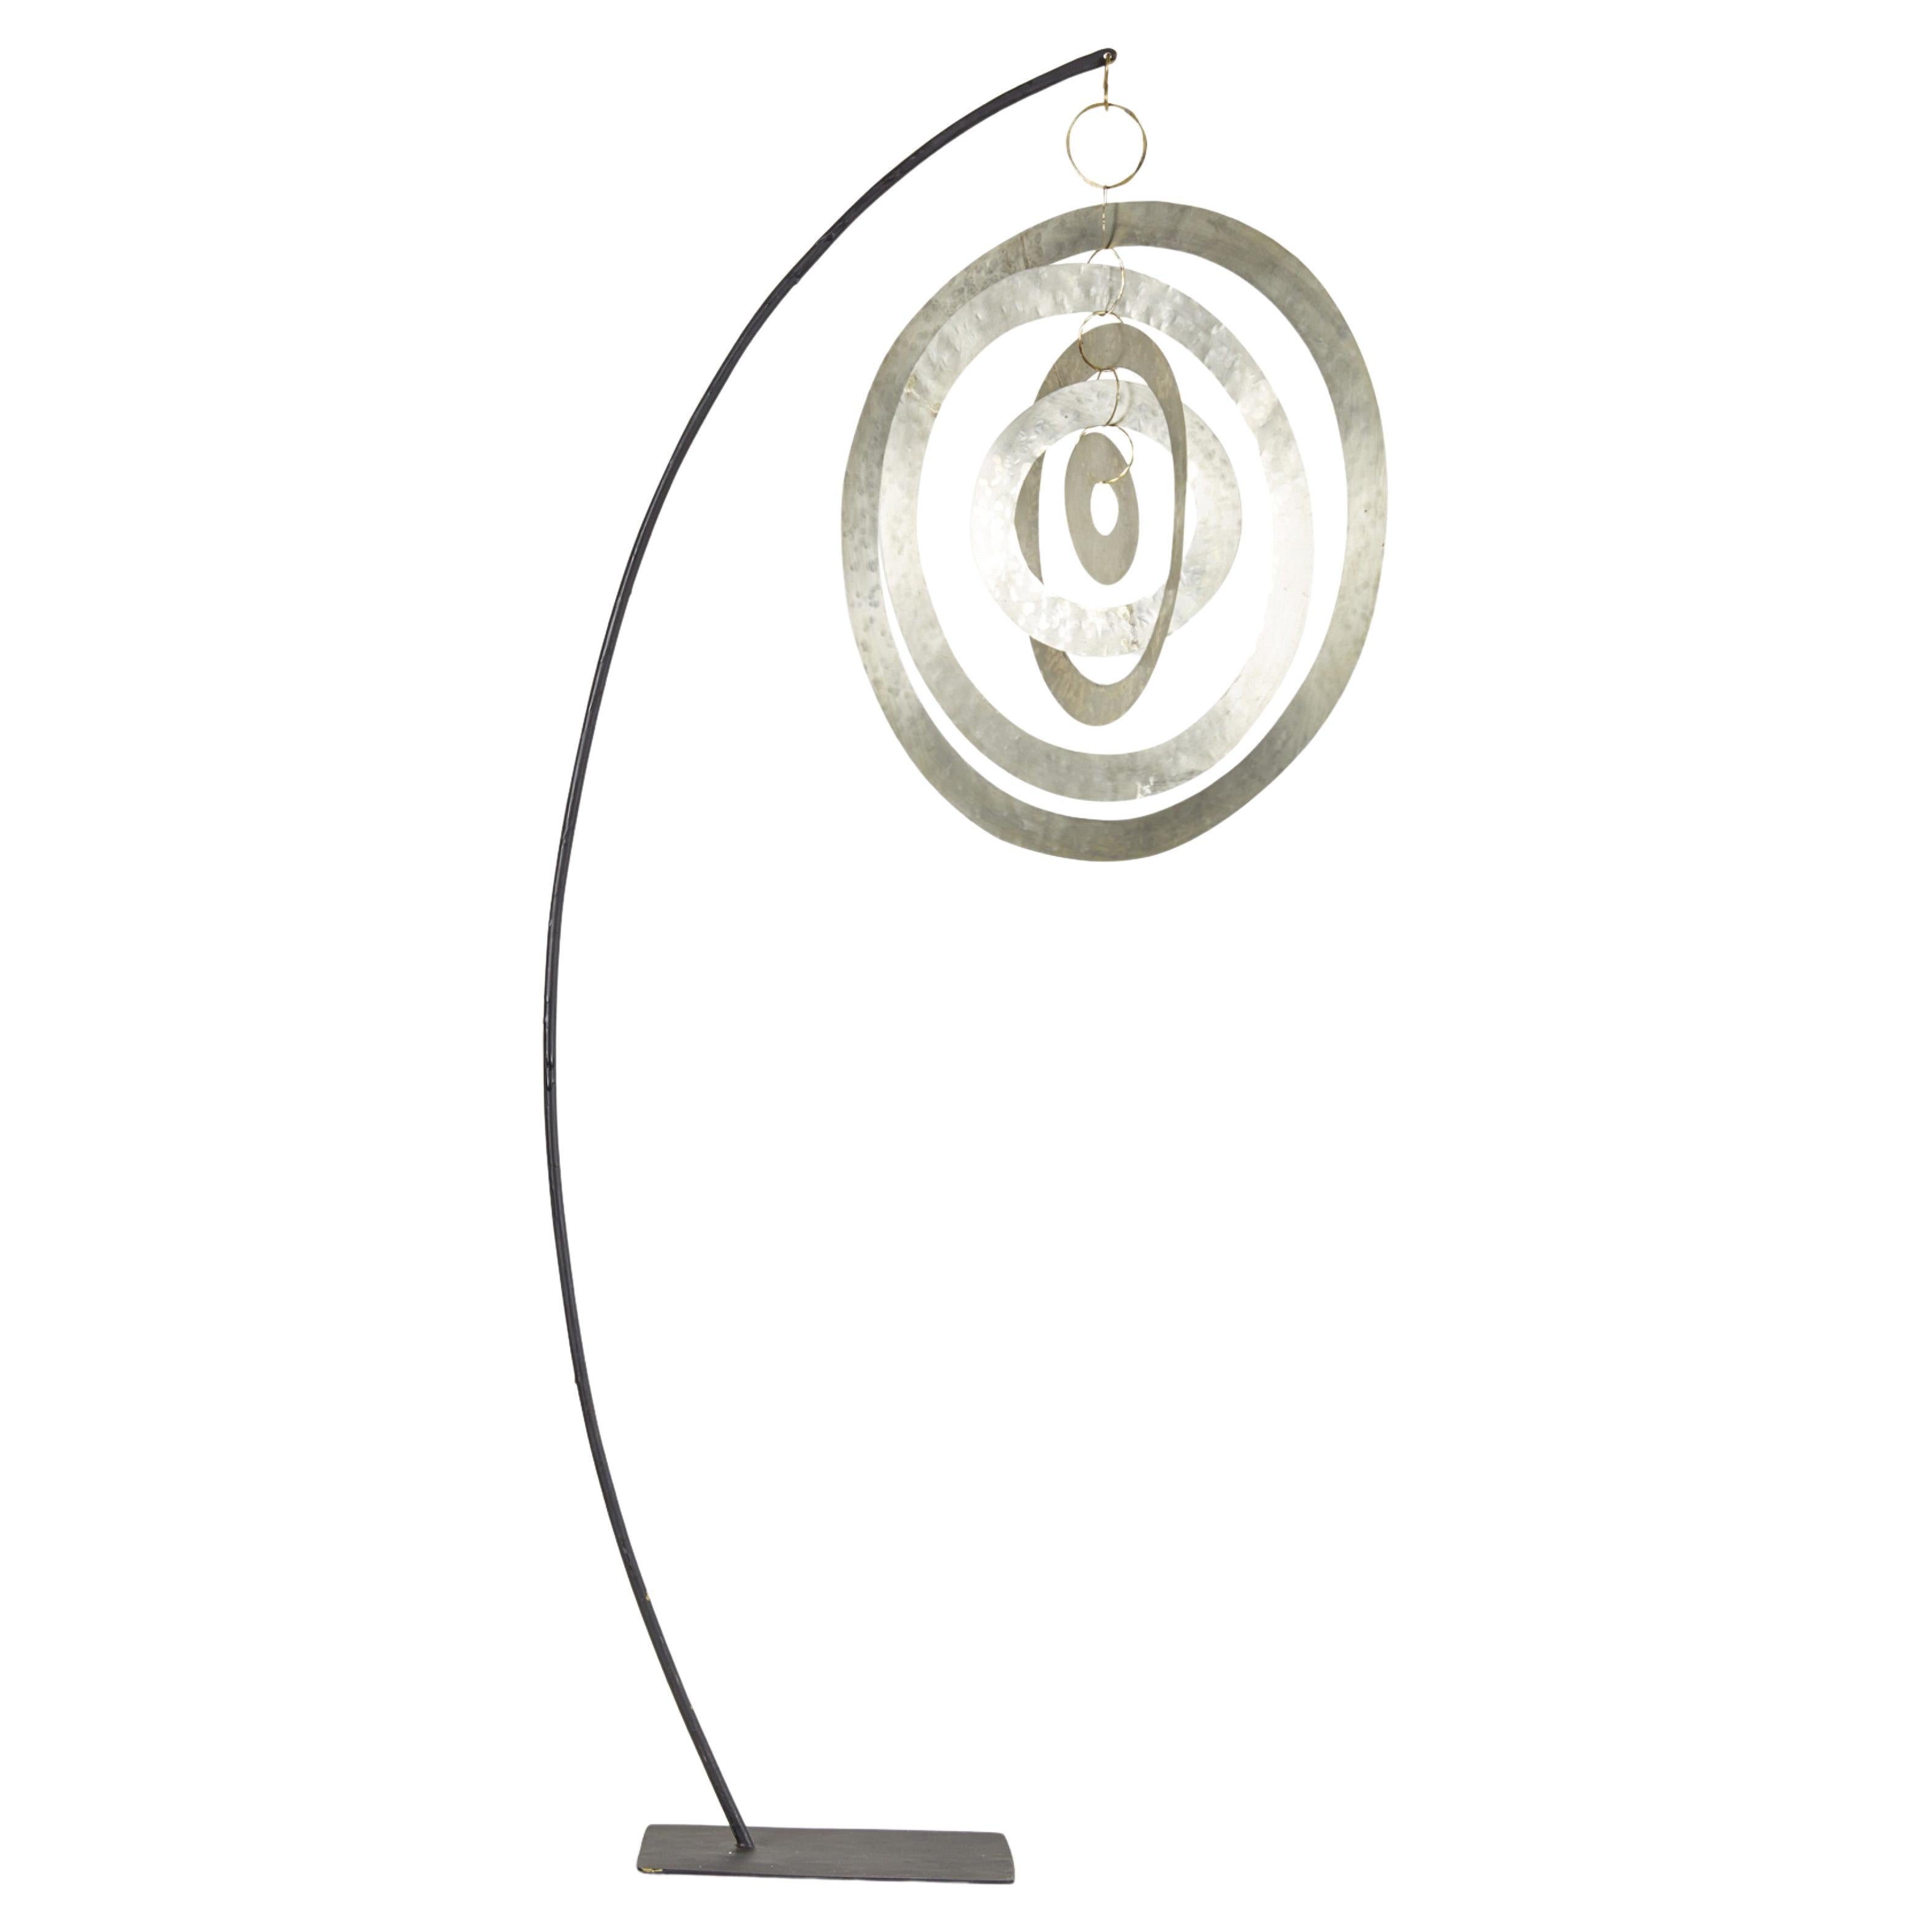 Contemporary Abstract Hammered Nickel Orbital Sculpture Suspended on a Metal Mou For Sale